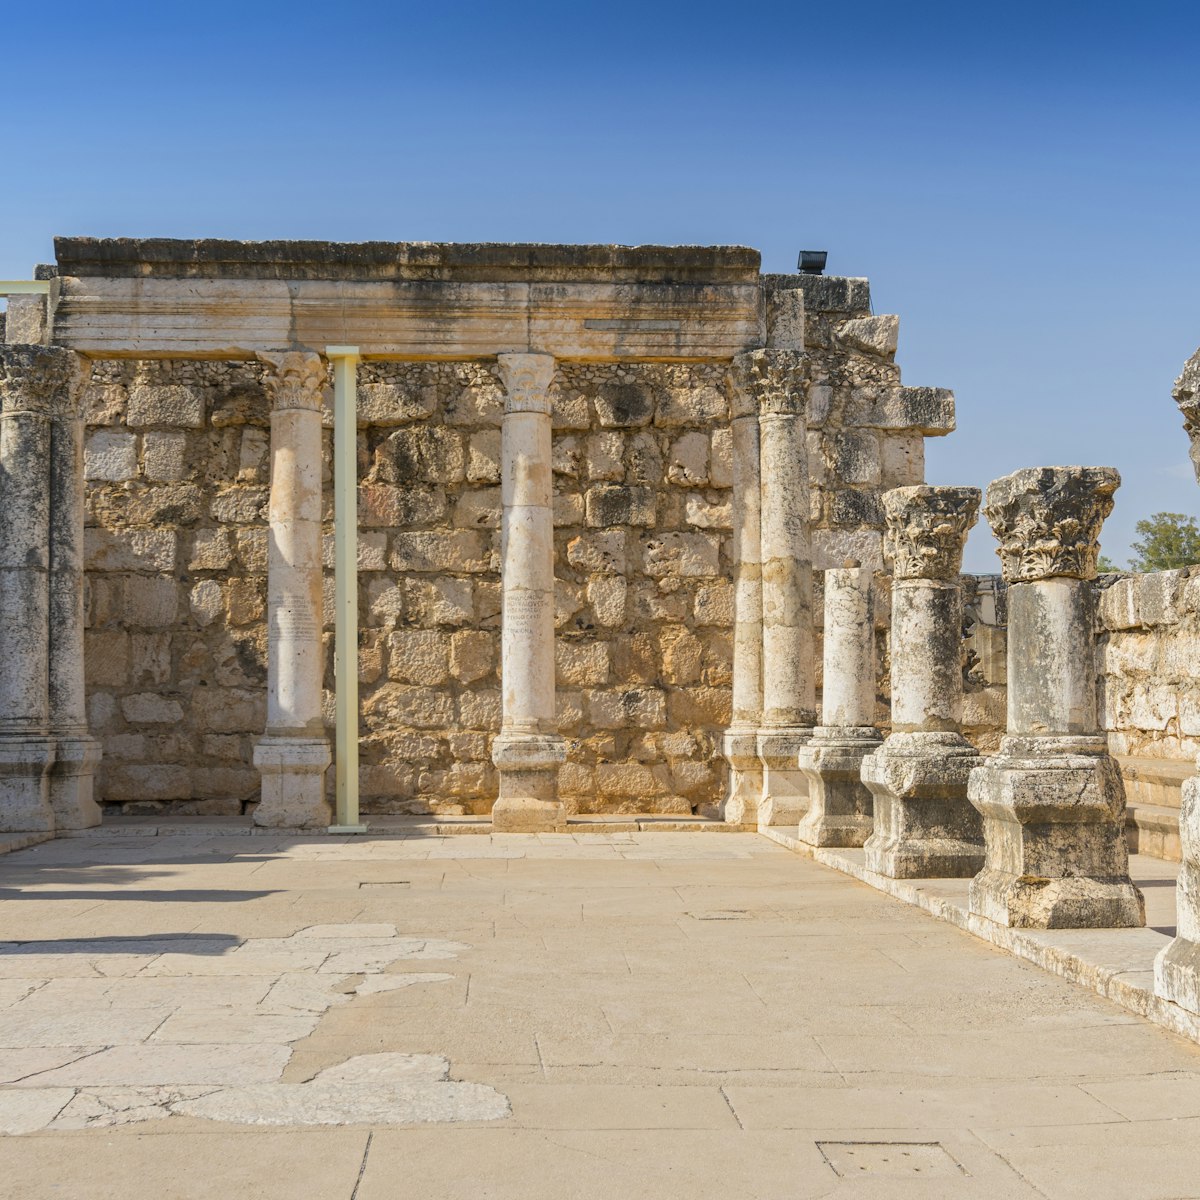 Ruins of the old synagogue in Capernaum.